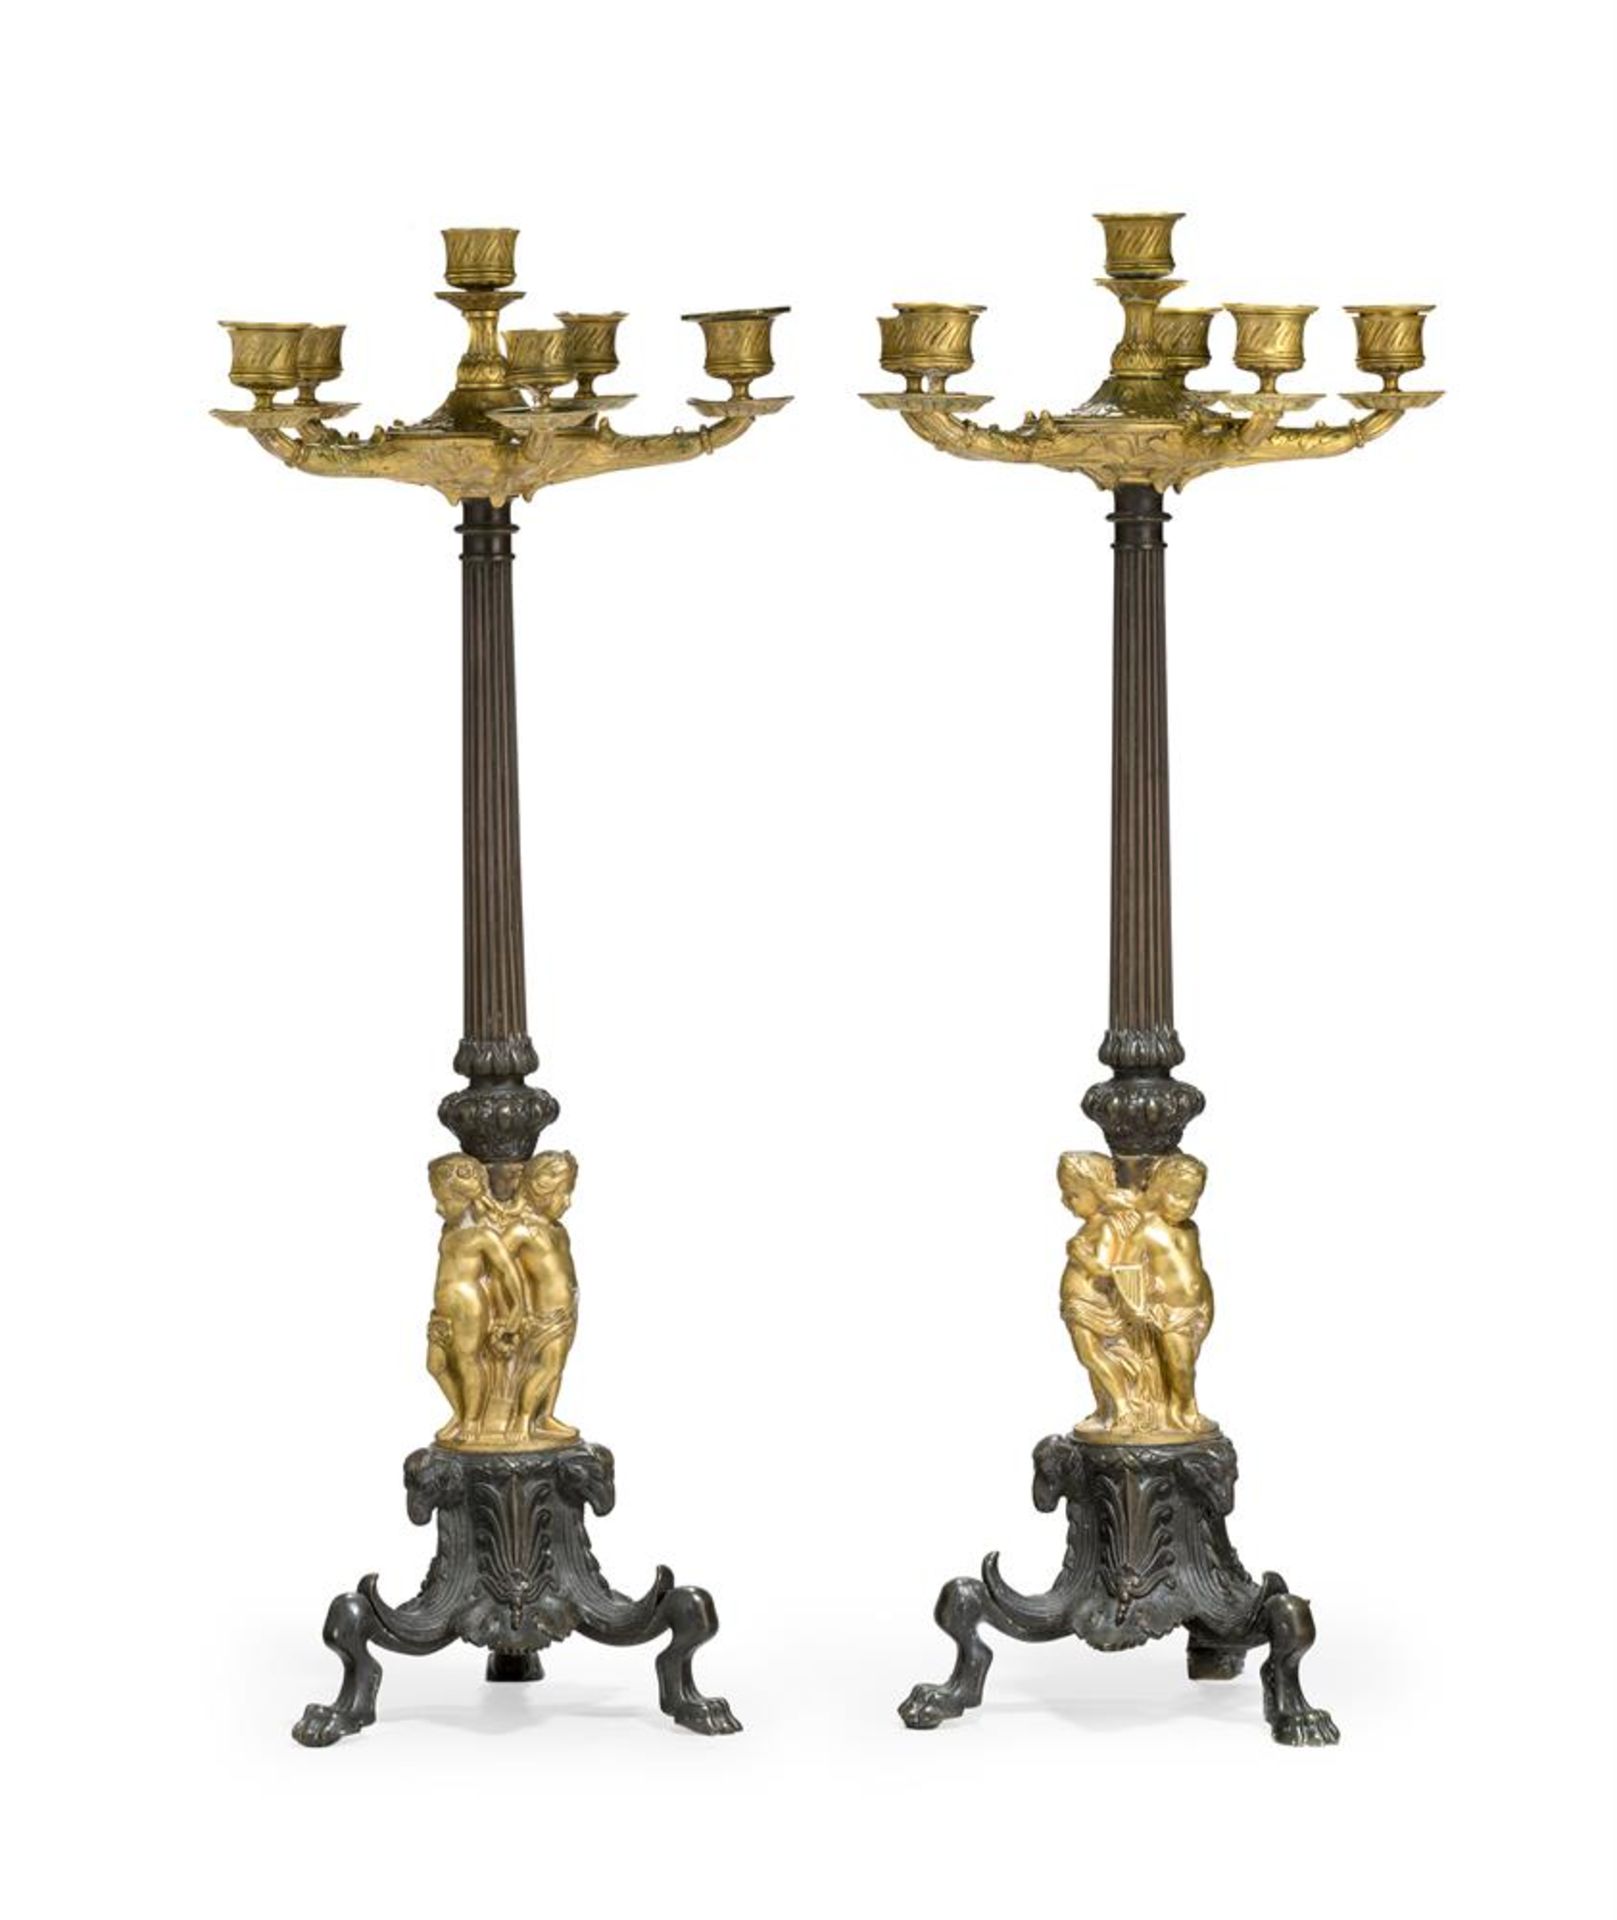 A LARGE PAIR OF PATINATED AND PARCEL GILT SIX LIGHT CANDELABRA, 19TH CENTURY